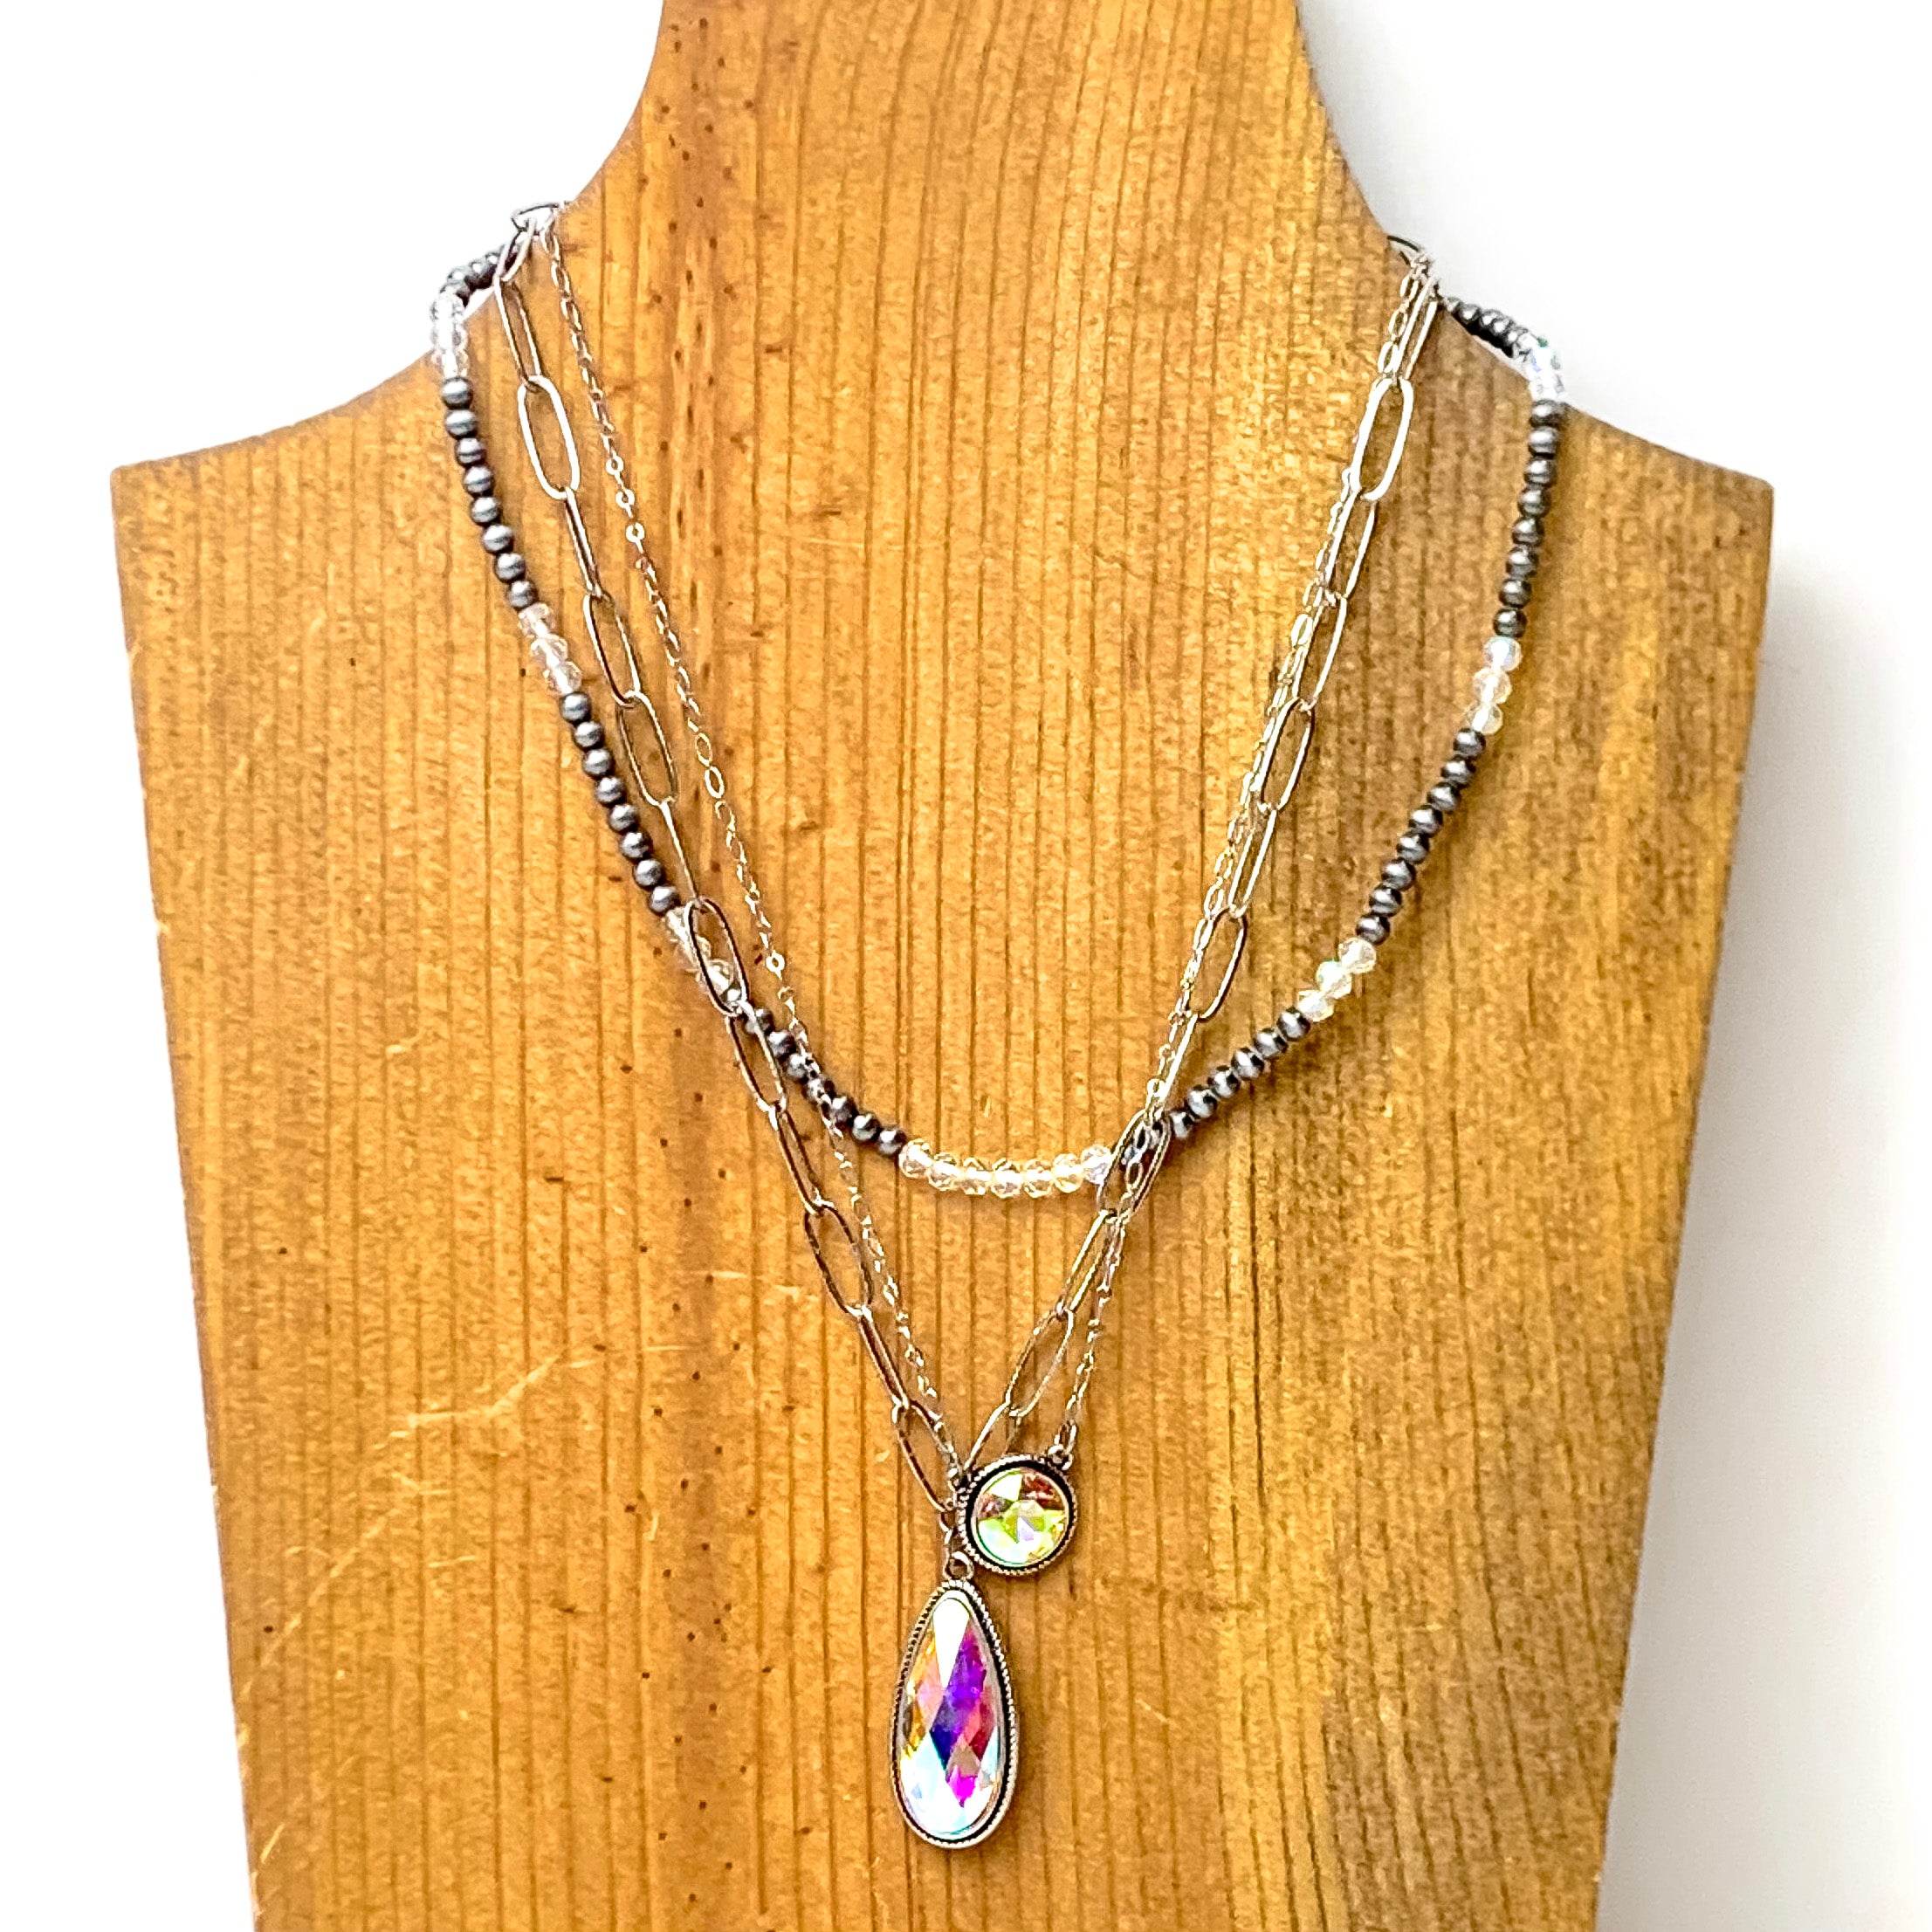 Three Row Faux Navajo Pearl Chain Necklace with AB Stone Pendants in Silver Tone - Giddy Up Glamour Boutique